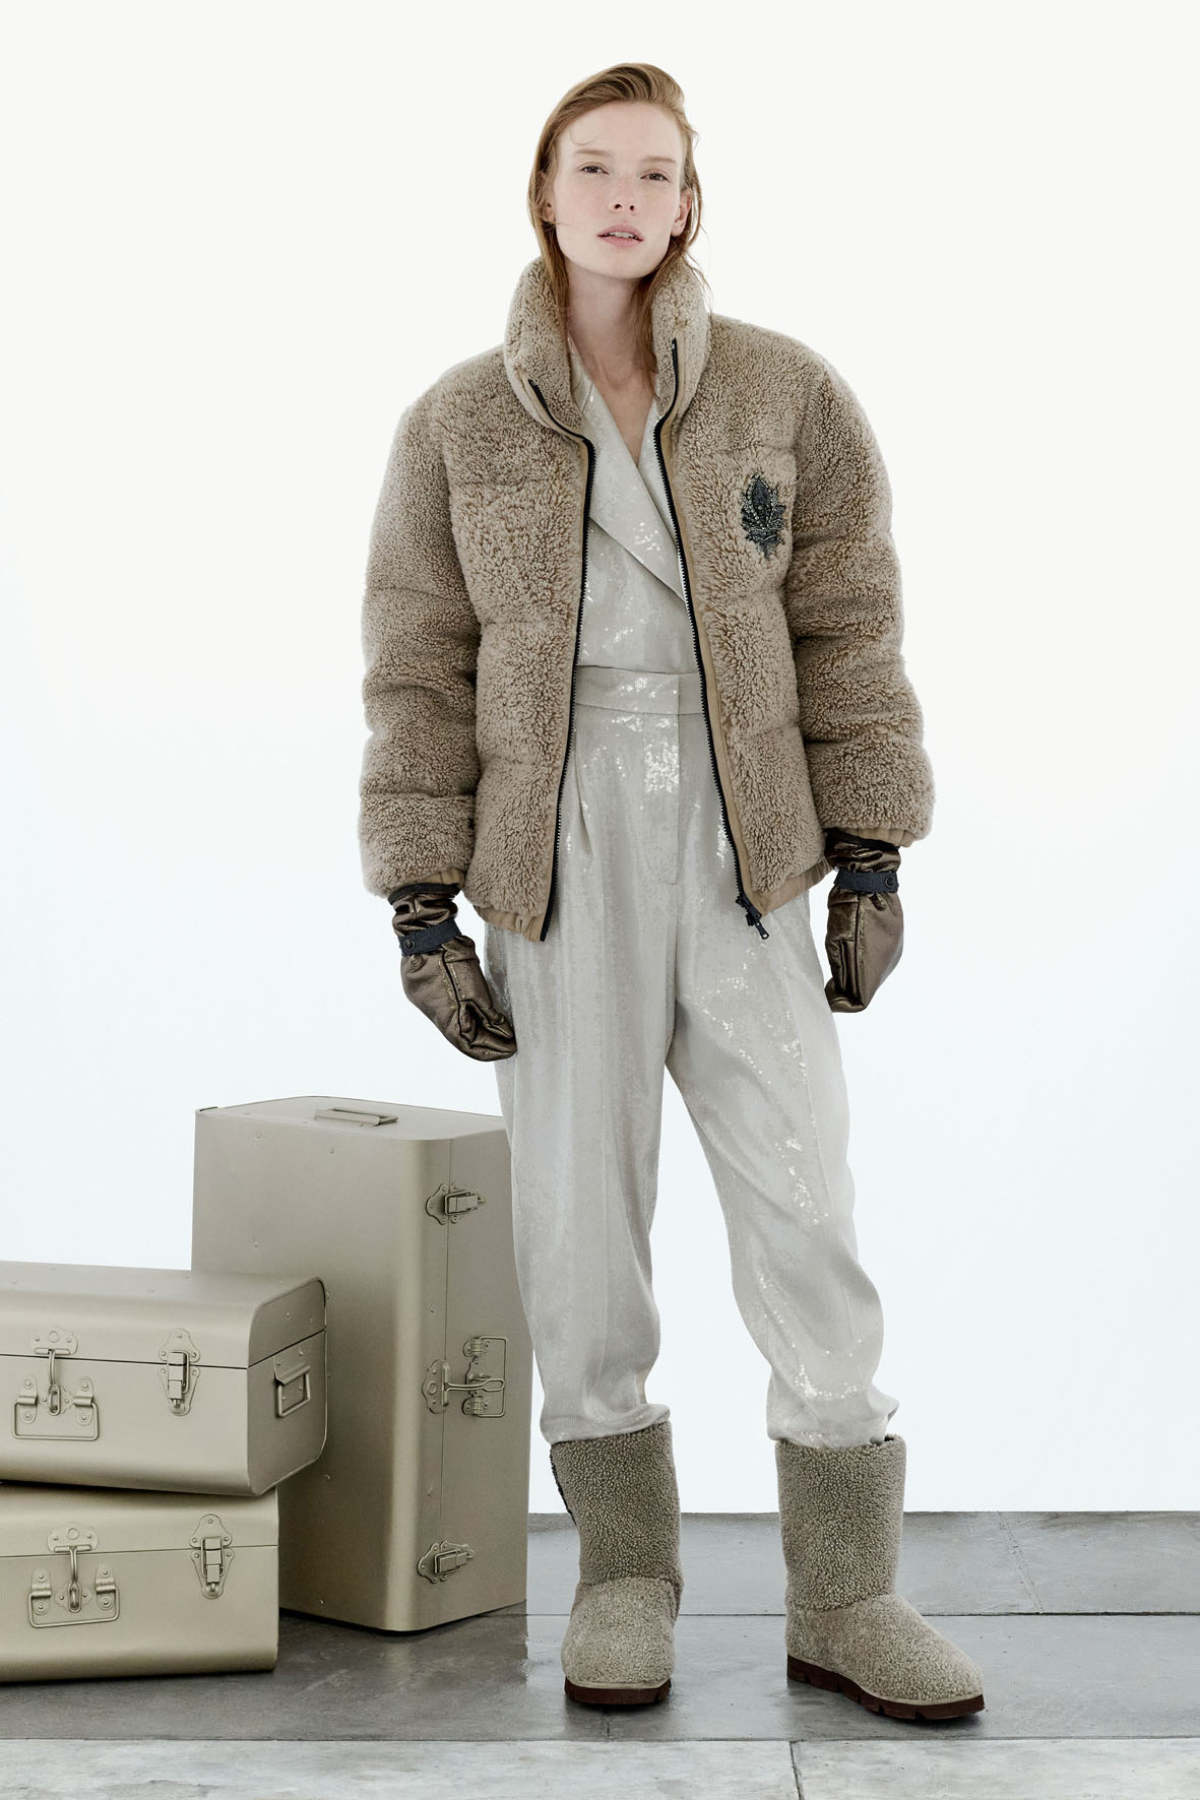 Brunello Cucinelli Introduces Its New Men's Spring Summer 2022 Collection -  Simplicity In Elegance - Luxferity Magazine